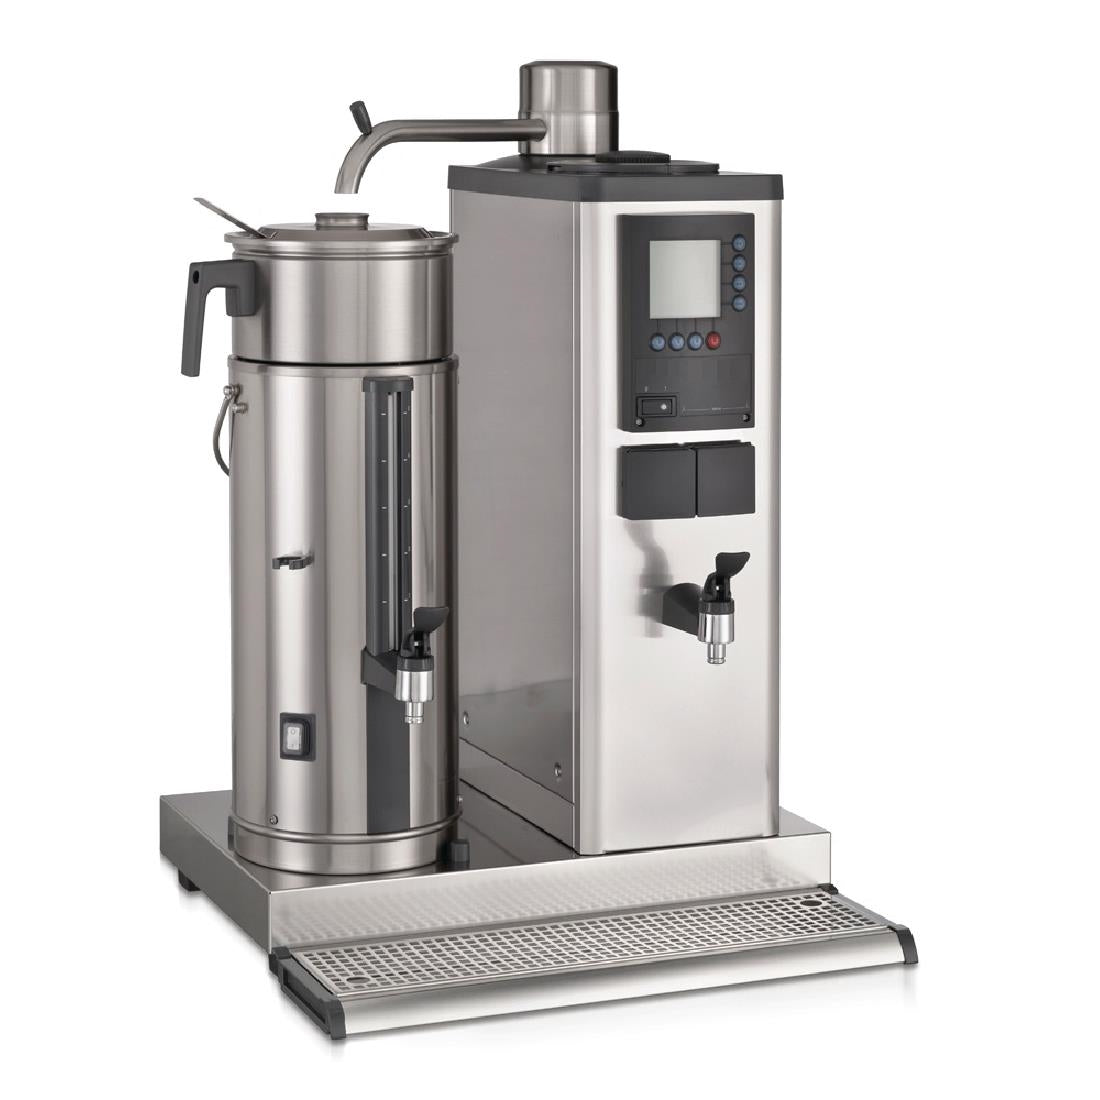 DC691 Bravilor B20 HWL Bulk Coffee Brewer with 20Ltr Coffee Urn and Hot Water Tap 3 Phase JD Catering Equipment Solutions Ltd